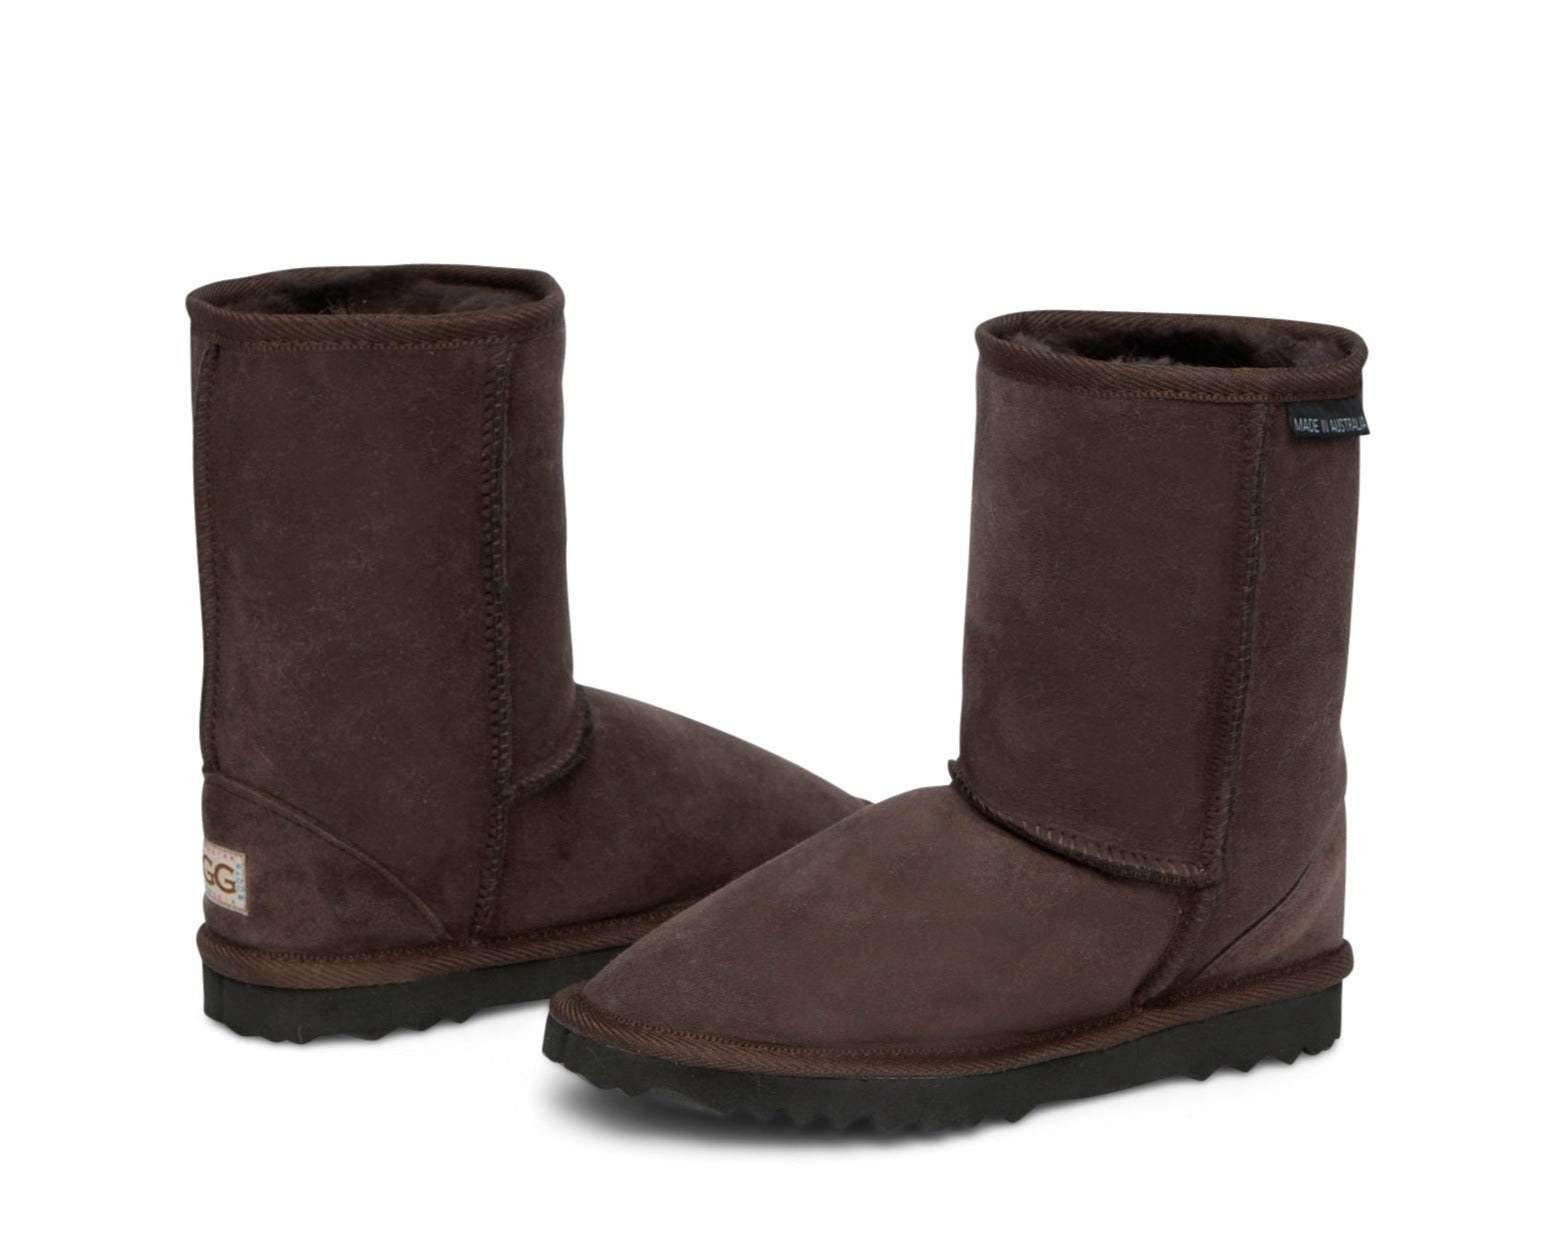 Kid's Classic Ugg Boots in Chocolate